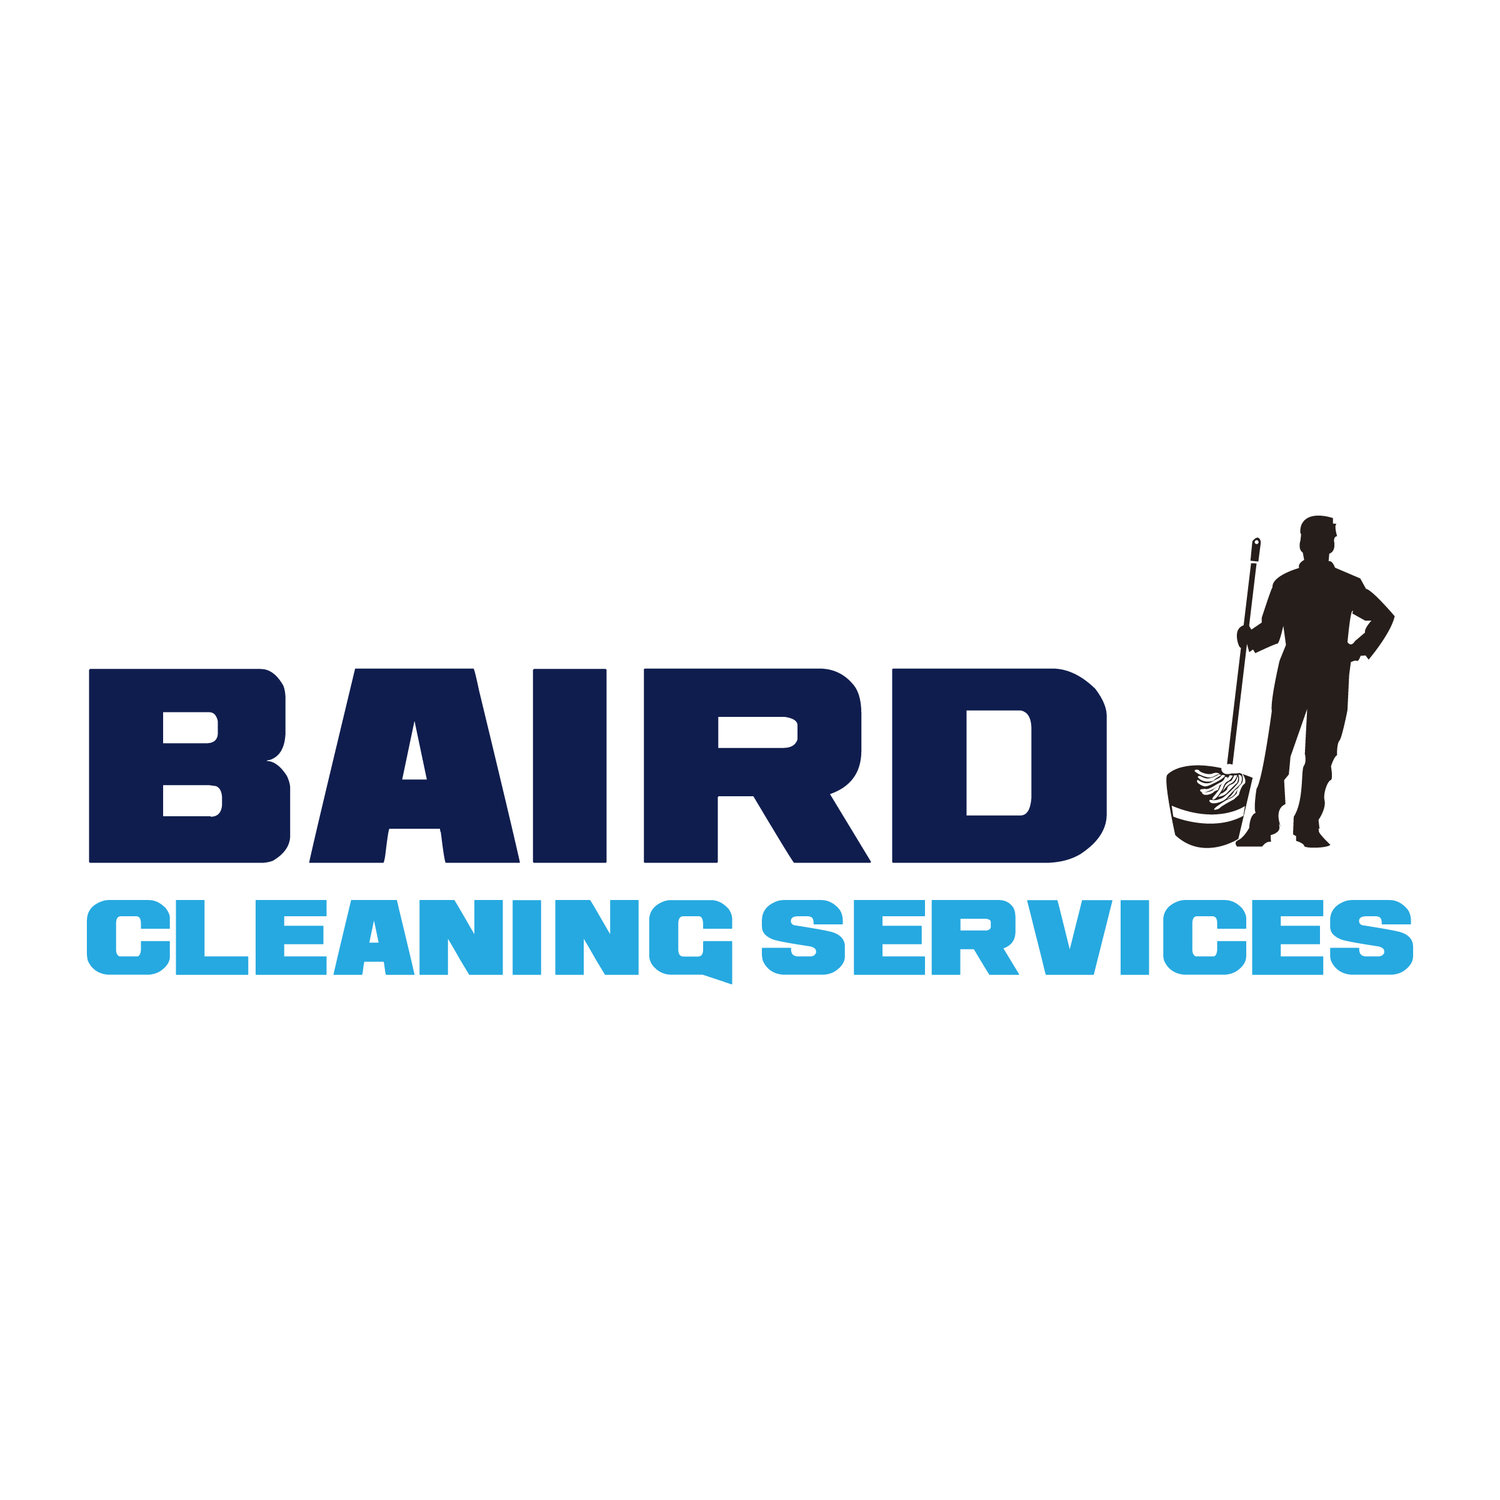 Baird Cleaning Services